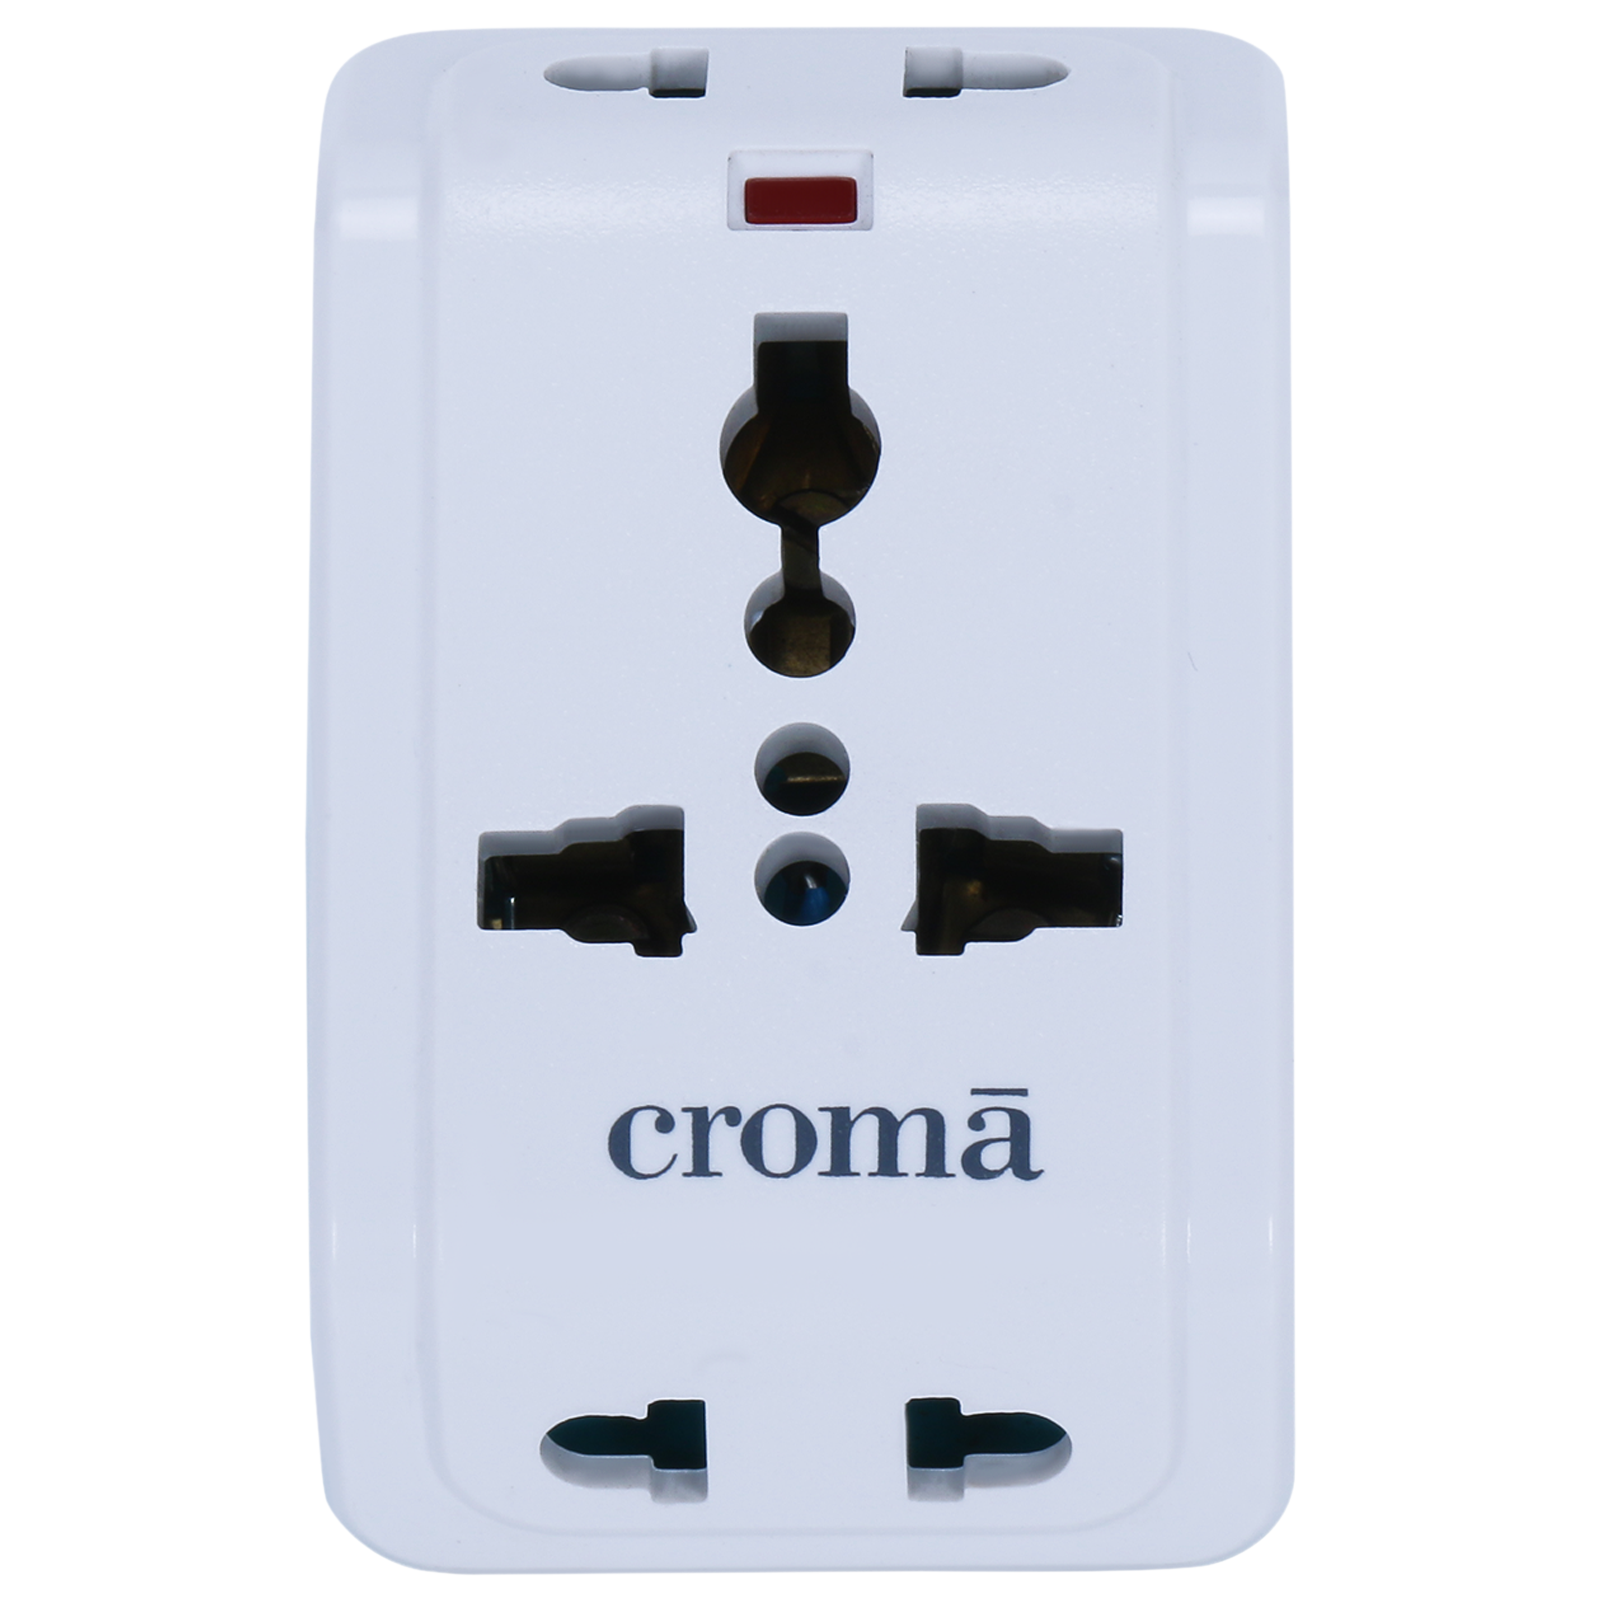 Croma 6 Amps 3 Way Multiplug (Built-in Surge Protection, CRSP3SPSPA264301, White)